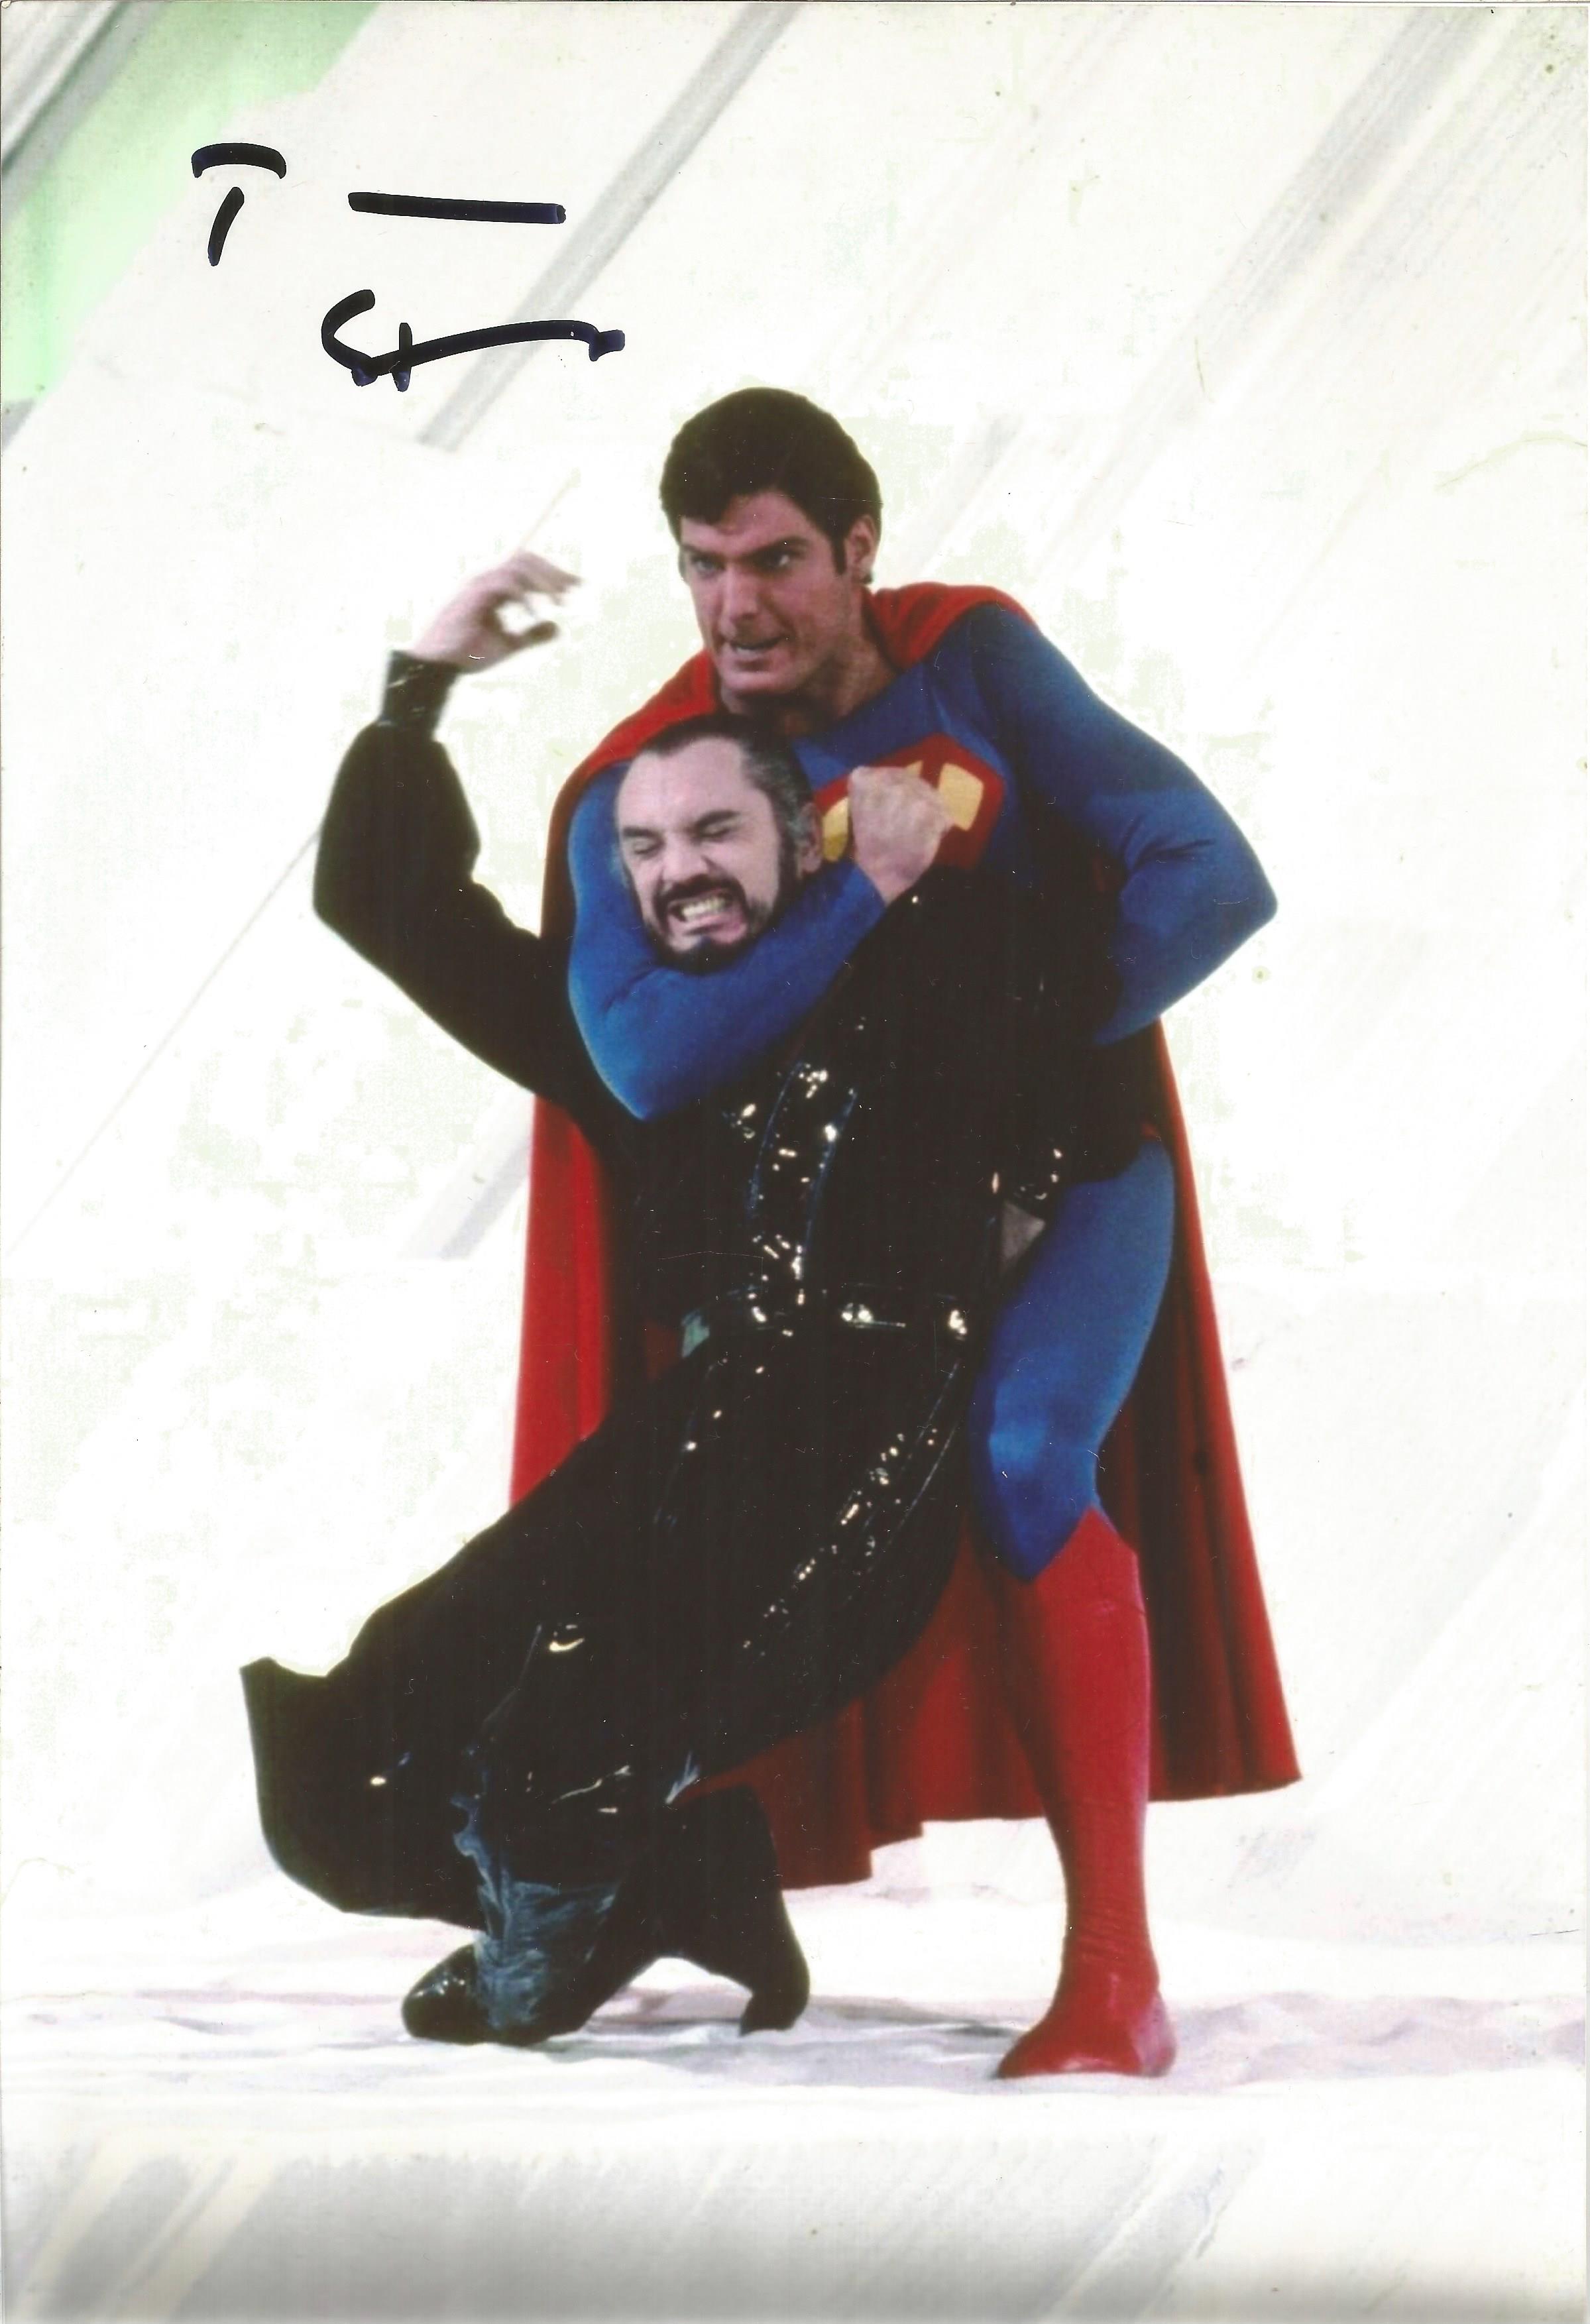 Terence Stamp signed 12x8 Superman colour photo. Terence Henry Stamp (born 22 July 1938) is an